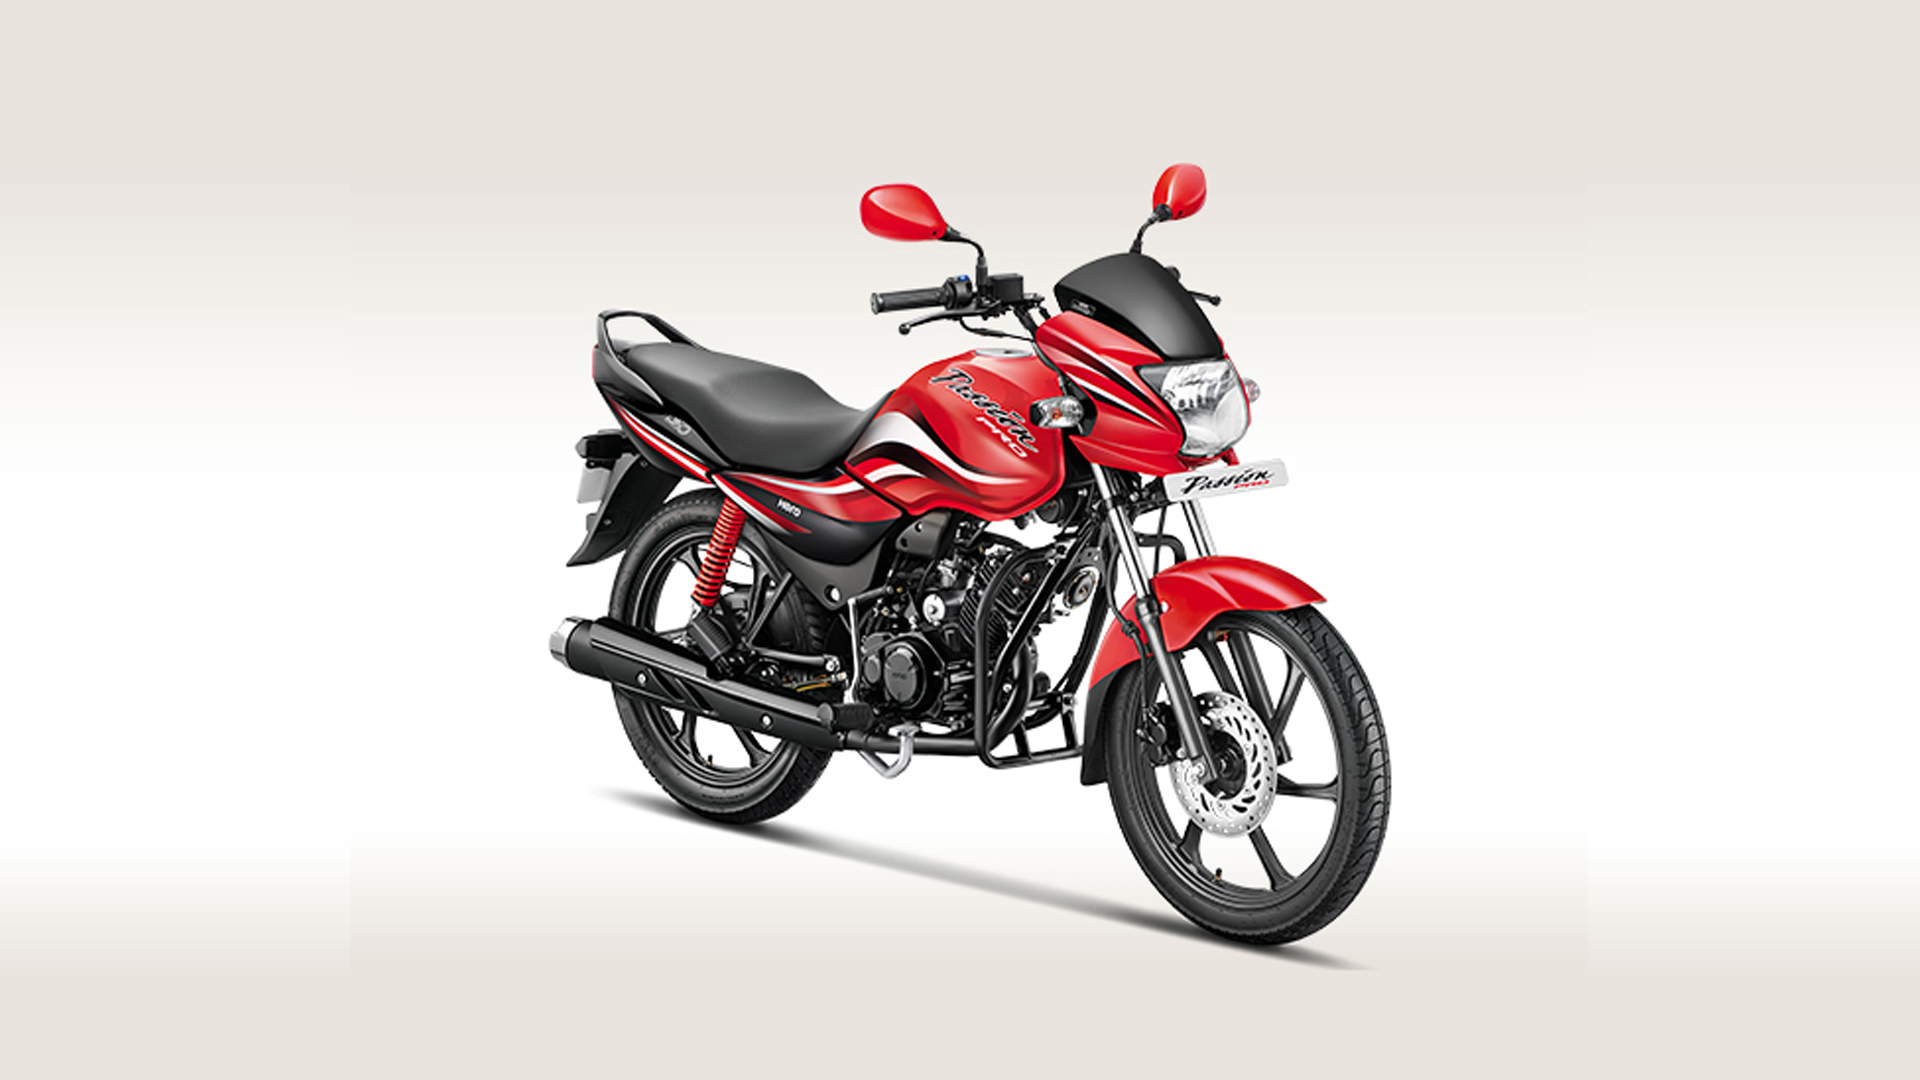 Hero Passion Pro 110 2020 Price Mileage Reviews Specification